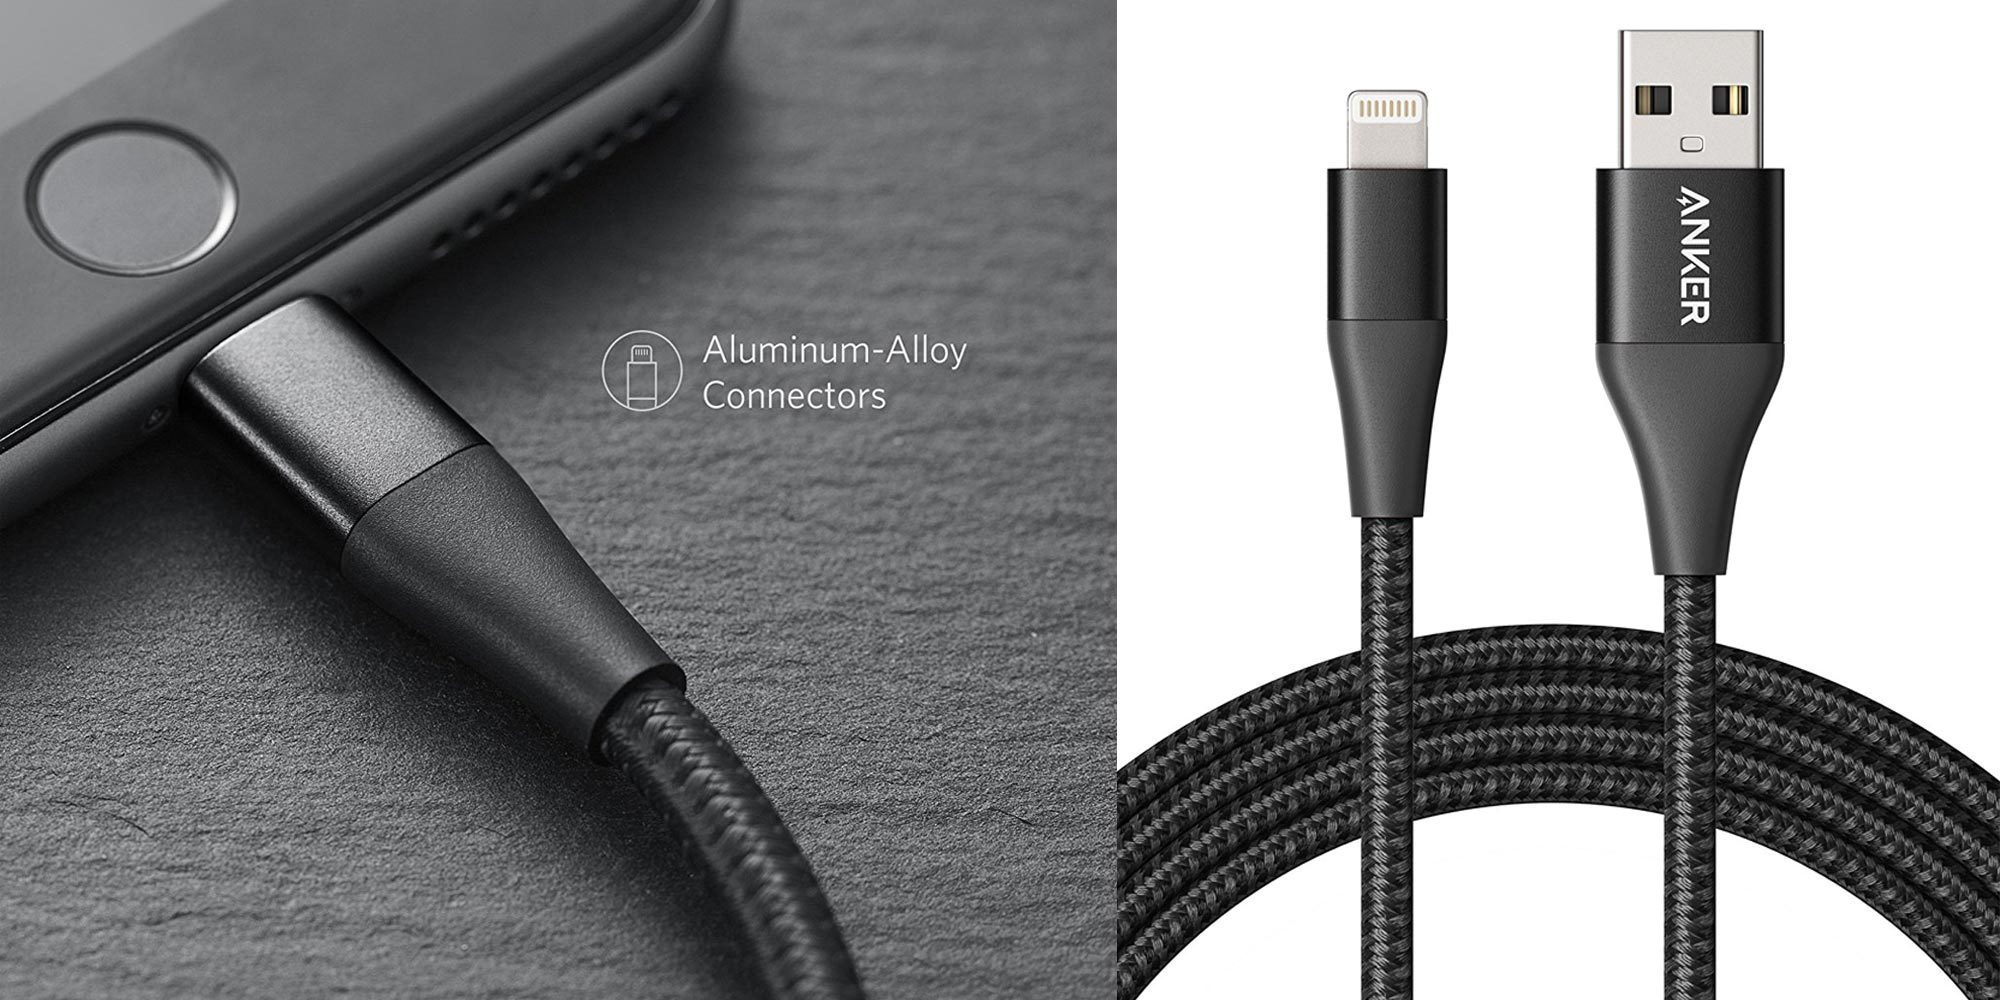 9to5Toys Lunch Break: Best Buy Last-Second Apple Event, Anker Powerline+ II Lightning Cable $13, Nike 25% off Sale, more